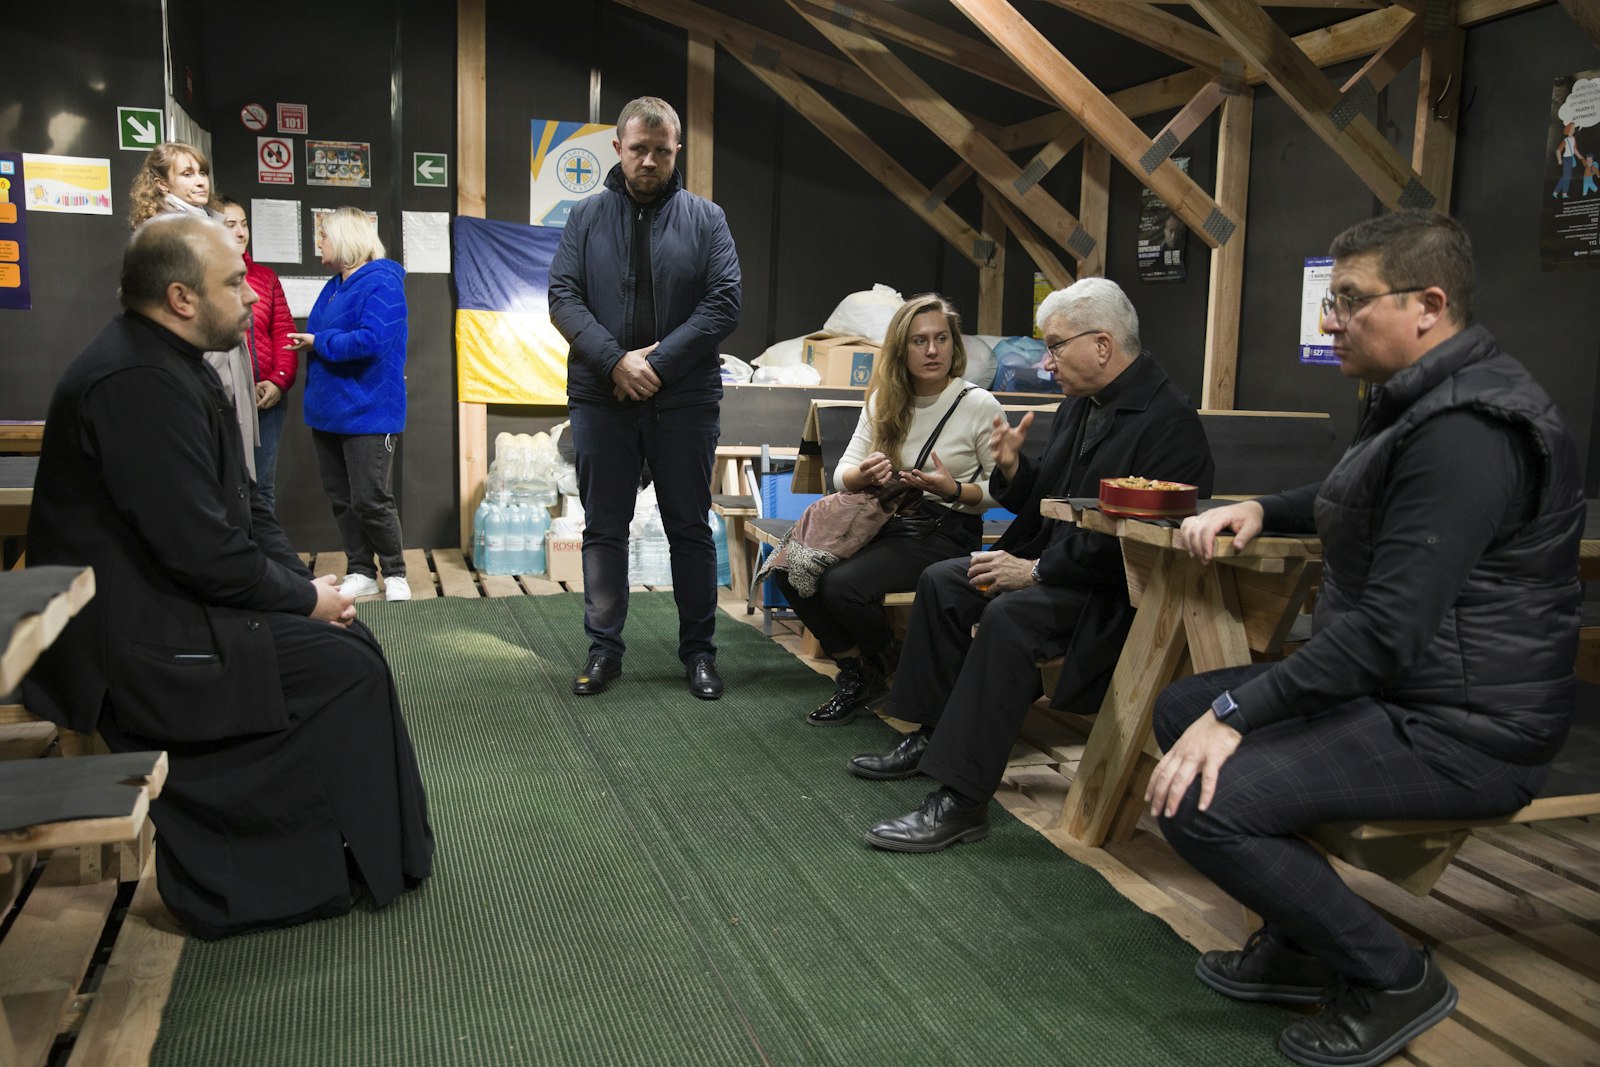 Bishop Monforton, second right, speaks with clergy and aid workers inside a makeshift shelter in Kiev, Ukraine, during a personal visit of solidarity to the Eastern European nation a year and a half after the war began.